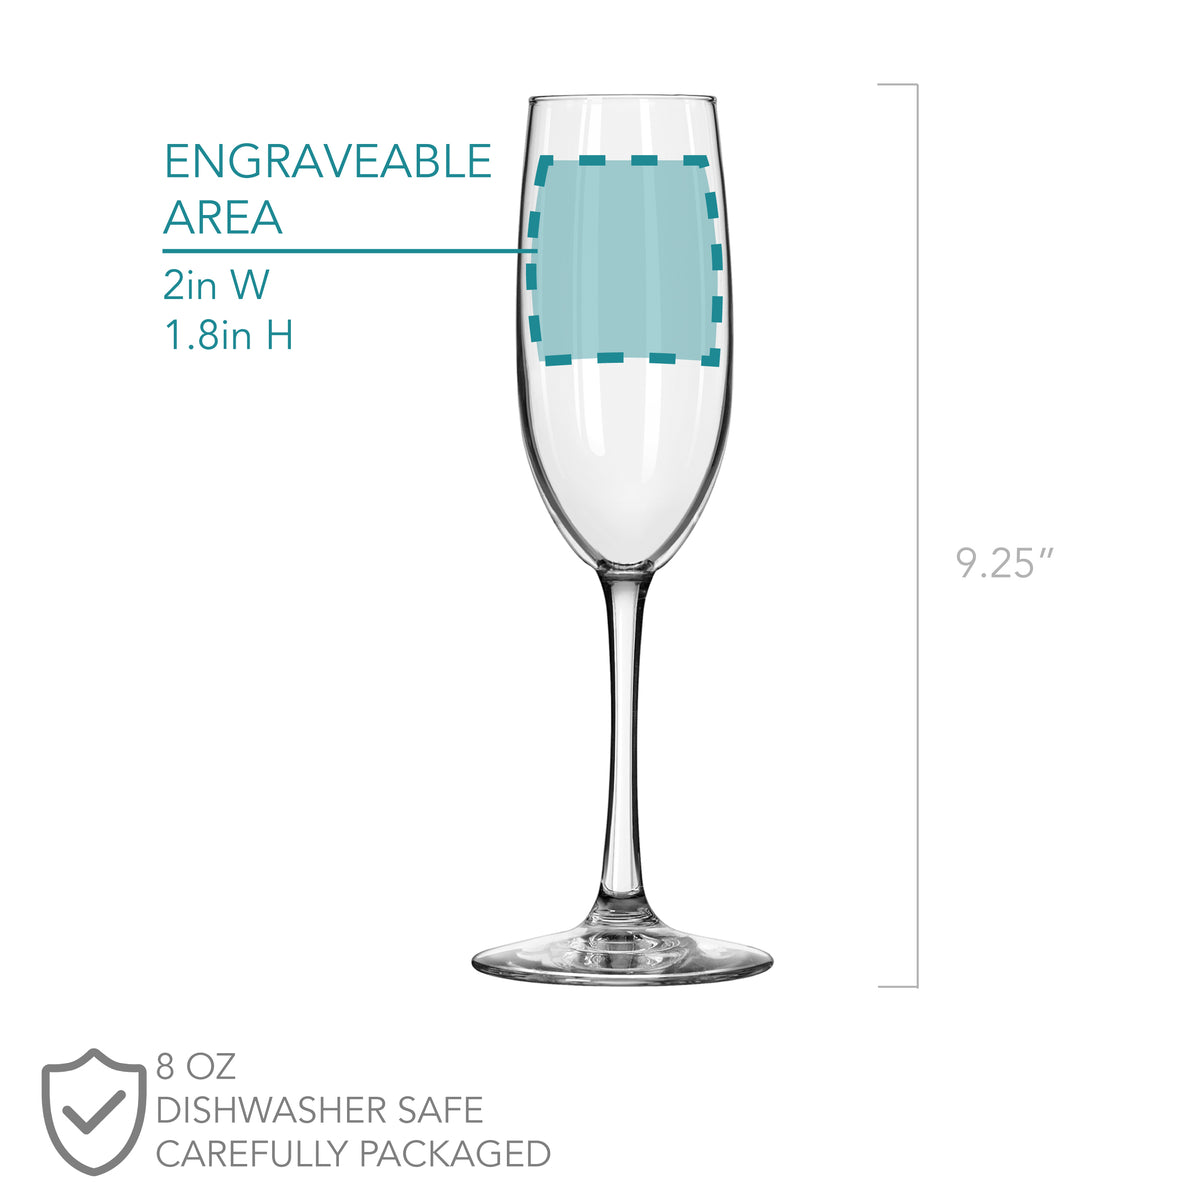 Personalized Champagne Flutes - Design: CUSTOM - Everything Etched